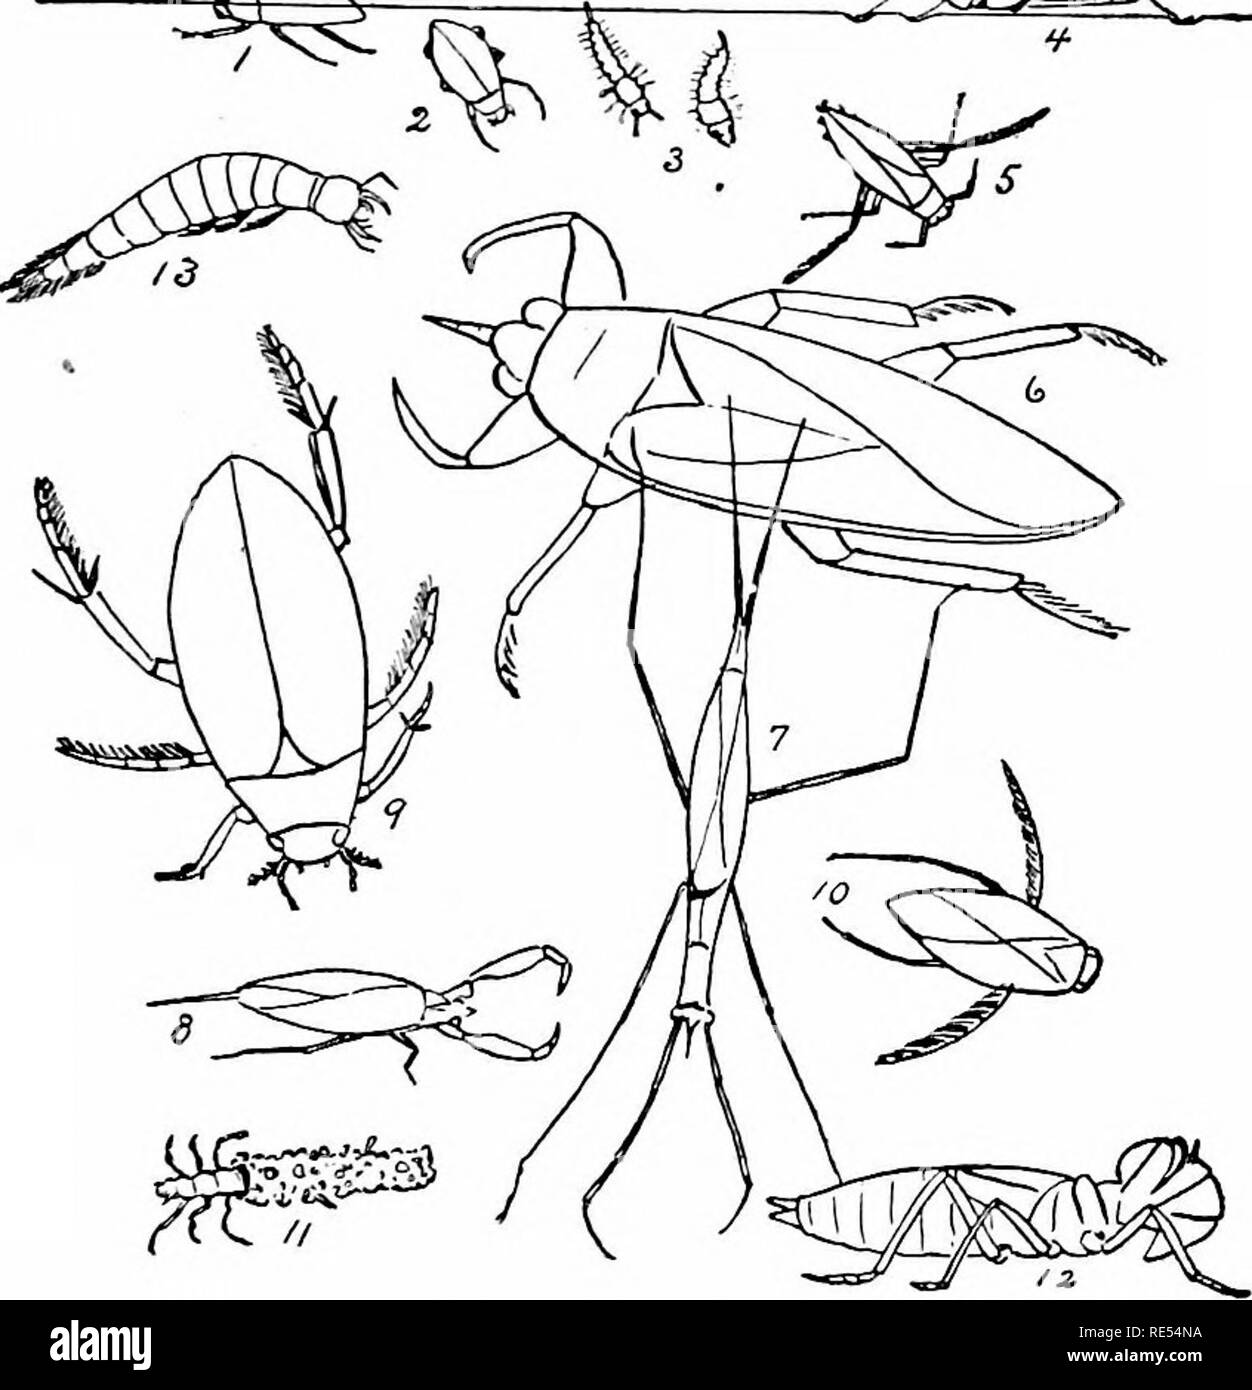 . Nature-study; a manual for teachers and students. Nature study. TYPICAL INSECTS 191 The lower lip (second pair of maxillae) is generally folded like a mask over the lower part of the face, but it can be suddenly shot out to seize mosquito &quot;wrigglers&quot; and other ^^^ ^^^. r. Whirling-beetle . 2. Diving-beeOe. 3. Mosquito 'W'rigg^lers. 4. Water-strider, Fig. 50. Some Aquatic Insects. 5. Back-swimmer. 6. &quot;Electric-light&quot; Bu^'. 7. Long-bodied Water-scorpion. ?. Short Water-scorpion. 9. Water Scavenger-beetle. 10. Water Boatman. 11. Caddis-worm. 12. Dragon-fly Larva. 13. Larva o Stock Photo